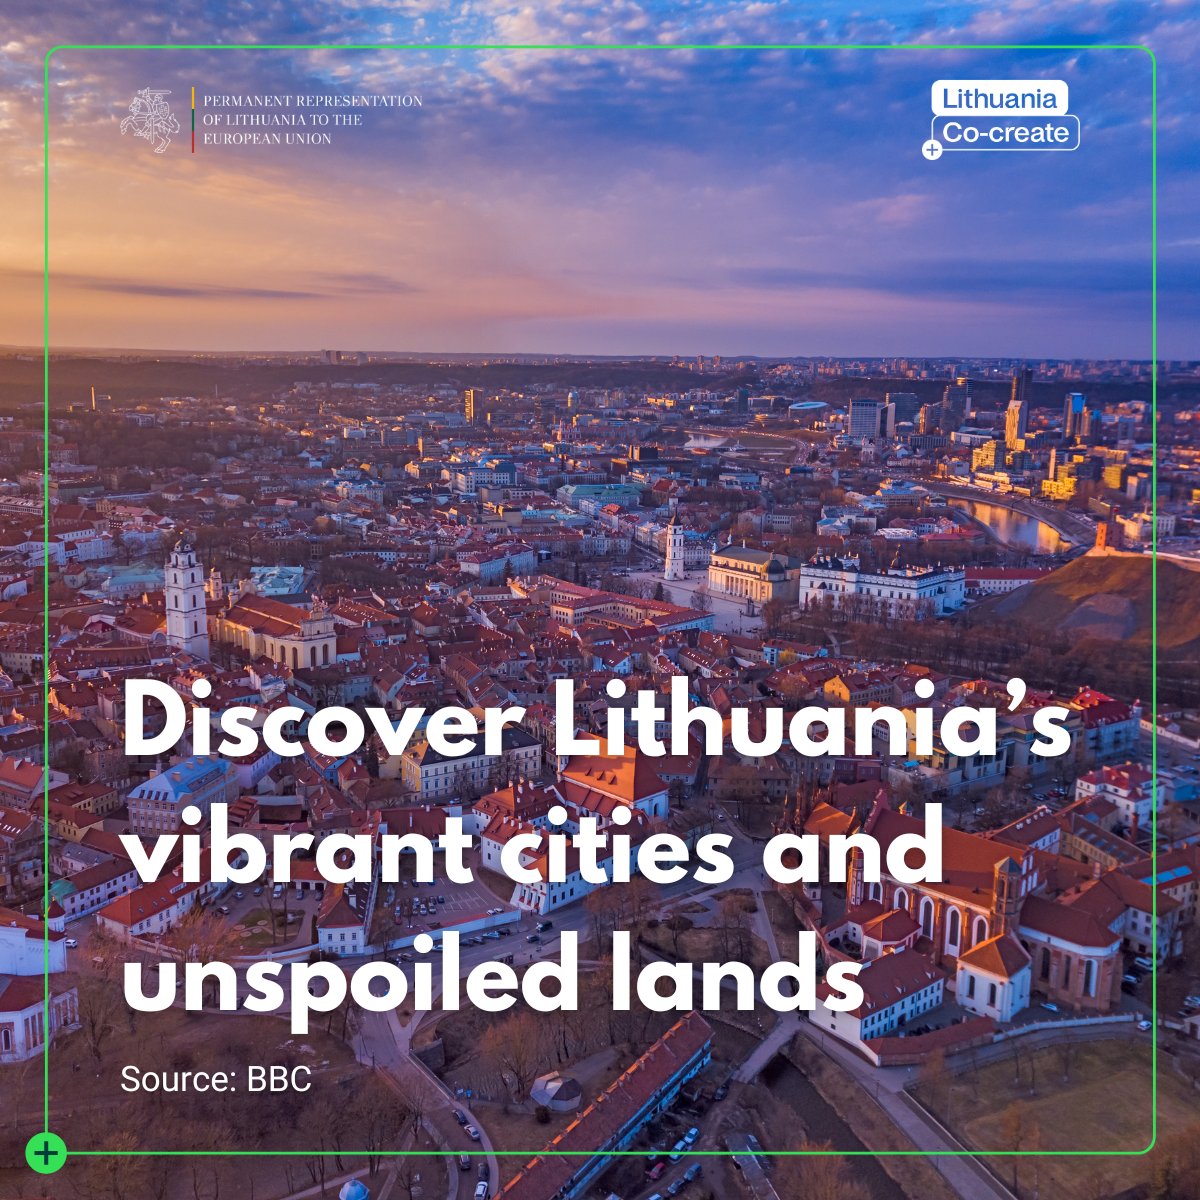 .@BBC writes 💬 Magical and serene: a trip around the Baltic state is a well-needed mental cleanse for today’s travelers seeking escape. Proud keepers of the Grand Duchy's 500-year legacy, #Lithuania 🇱🇹 is a vibrant country that flaunts bustling cities and unspoiled lands.